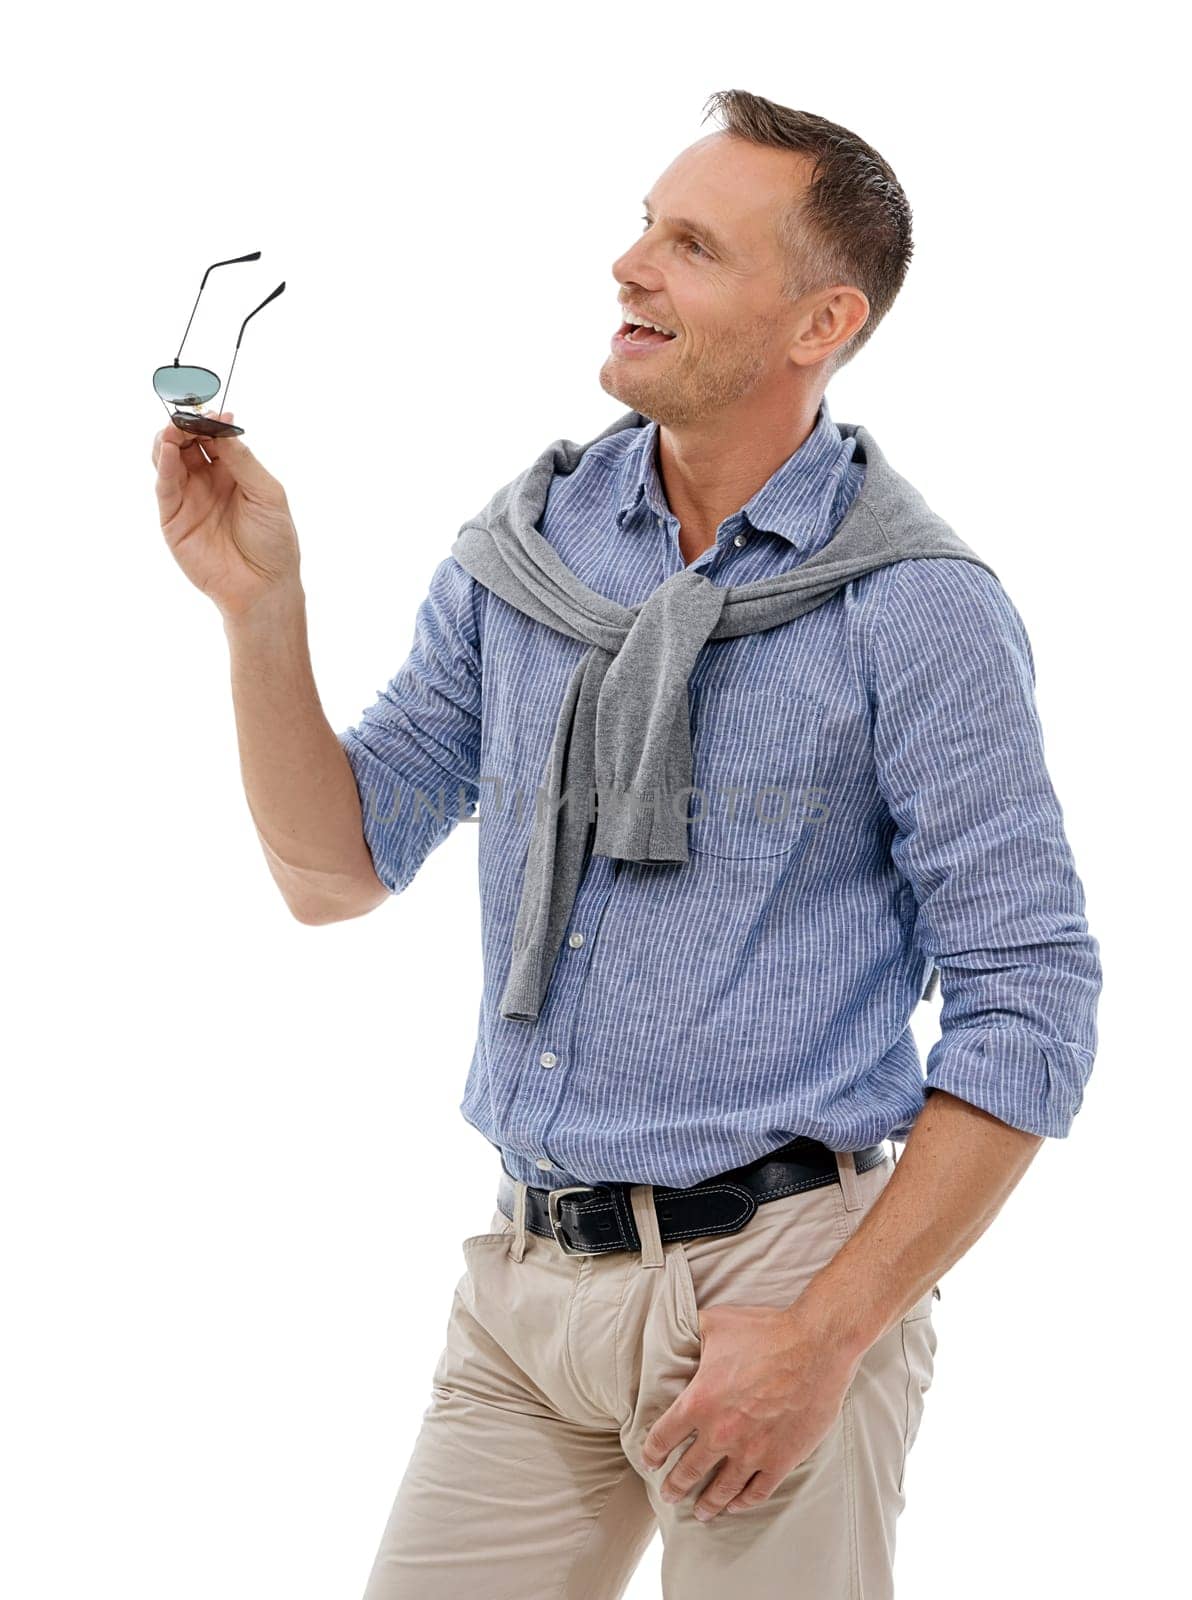 Happy, man and mature person with isolated white background in a studio feeling calm. Sunglasses, vacation fashion and holiday clothes of a male model with mockup and happiness with a smile.